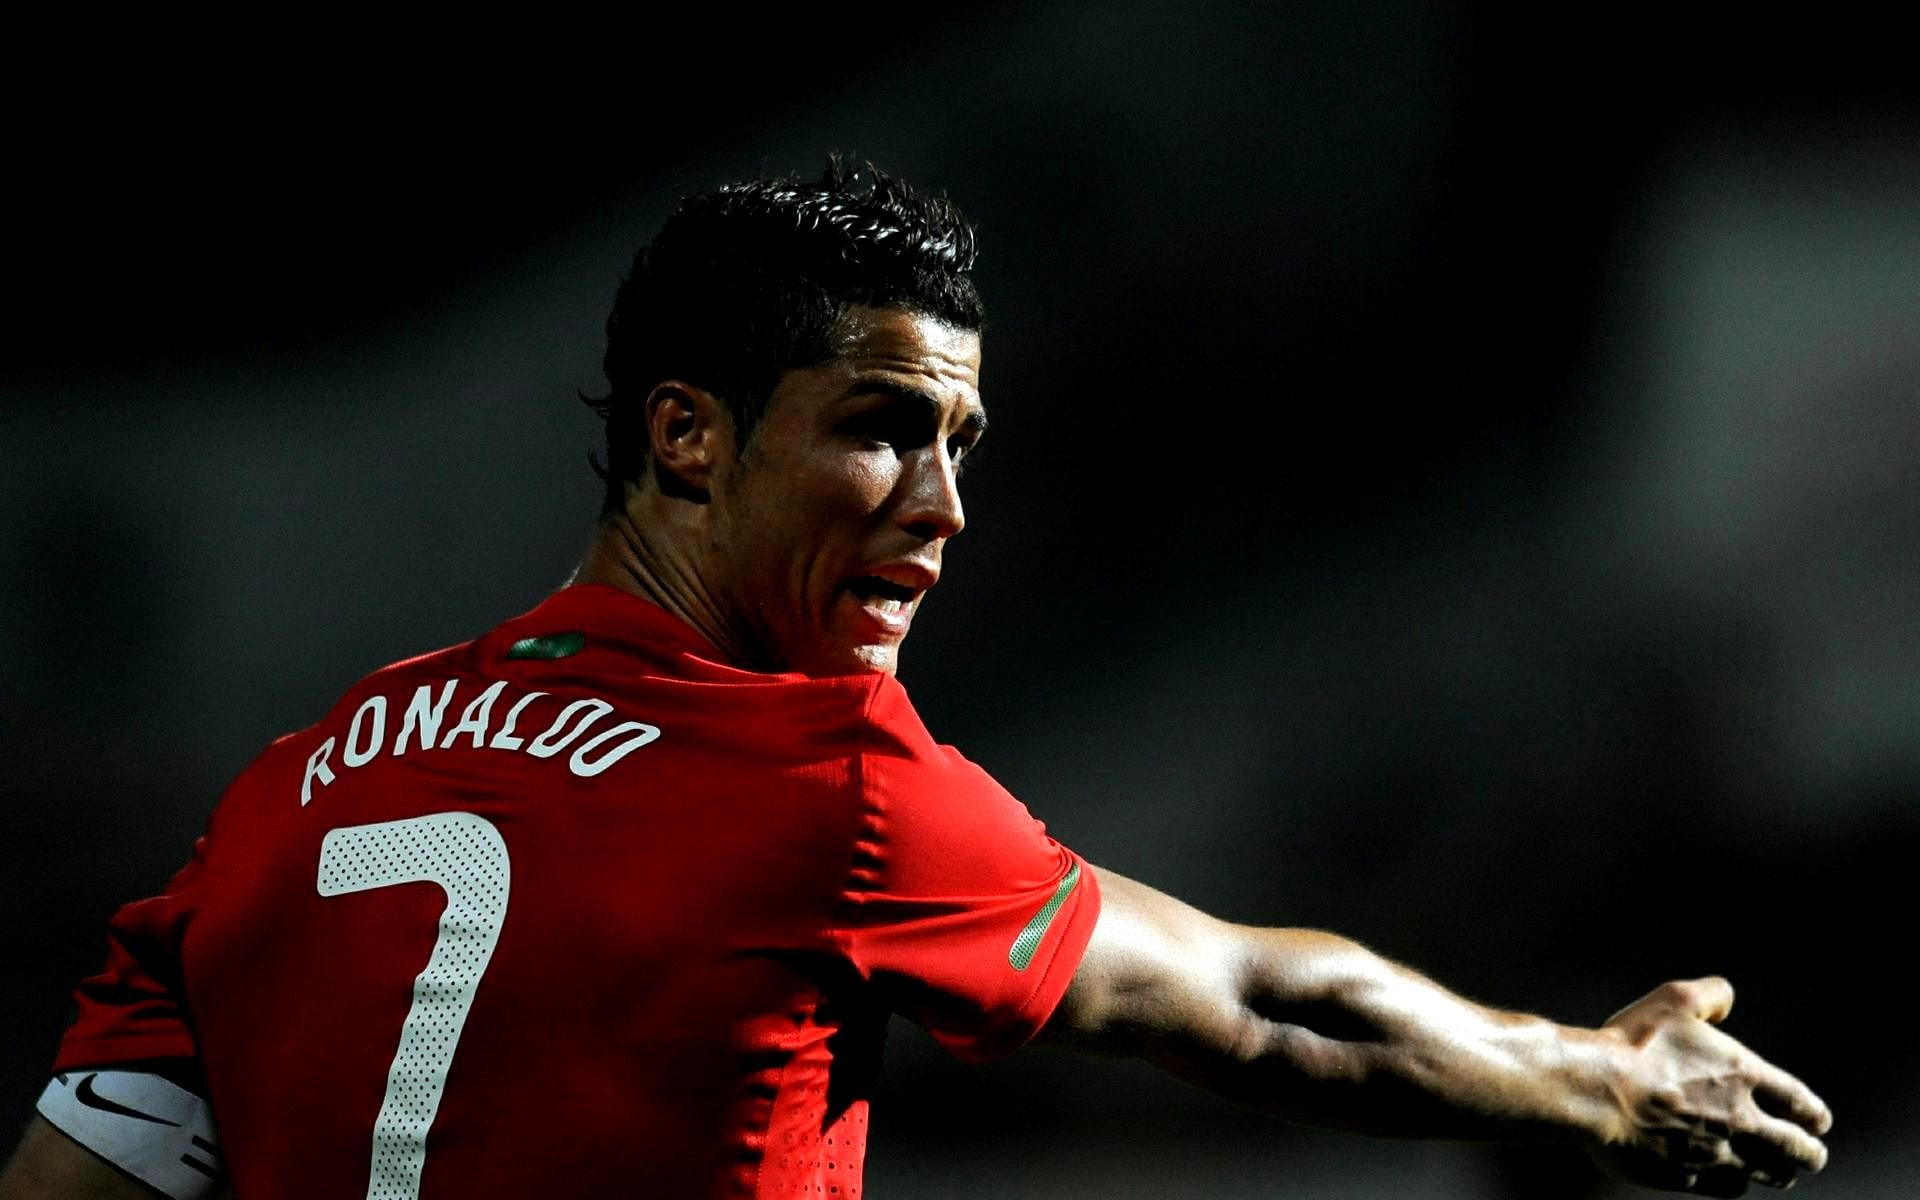 cr7 pretty picture background, sport, athlete, one person, young adult